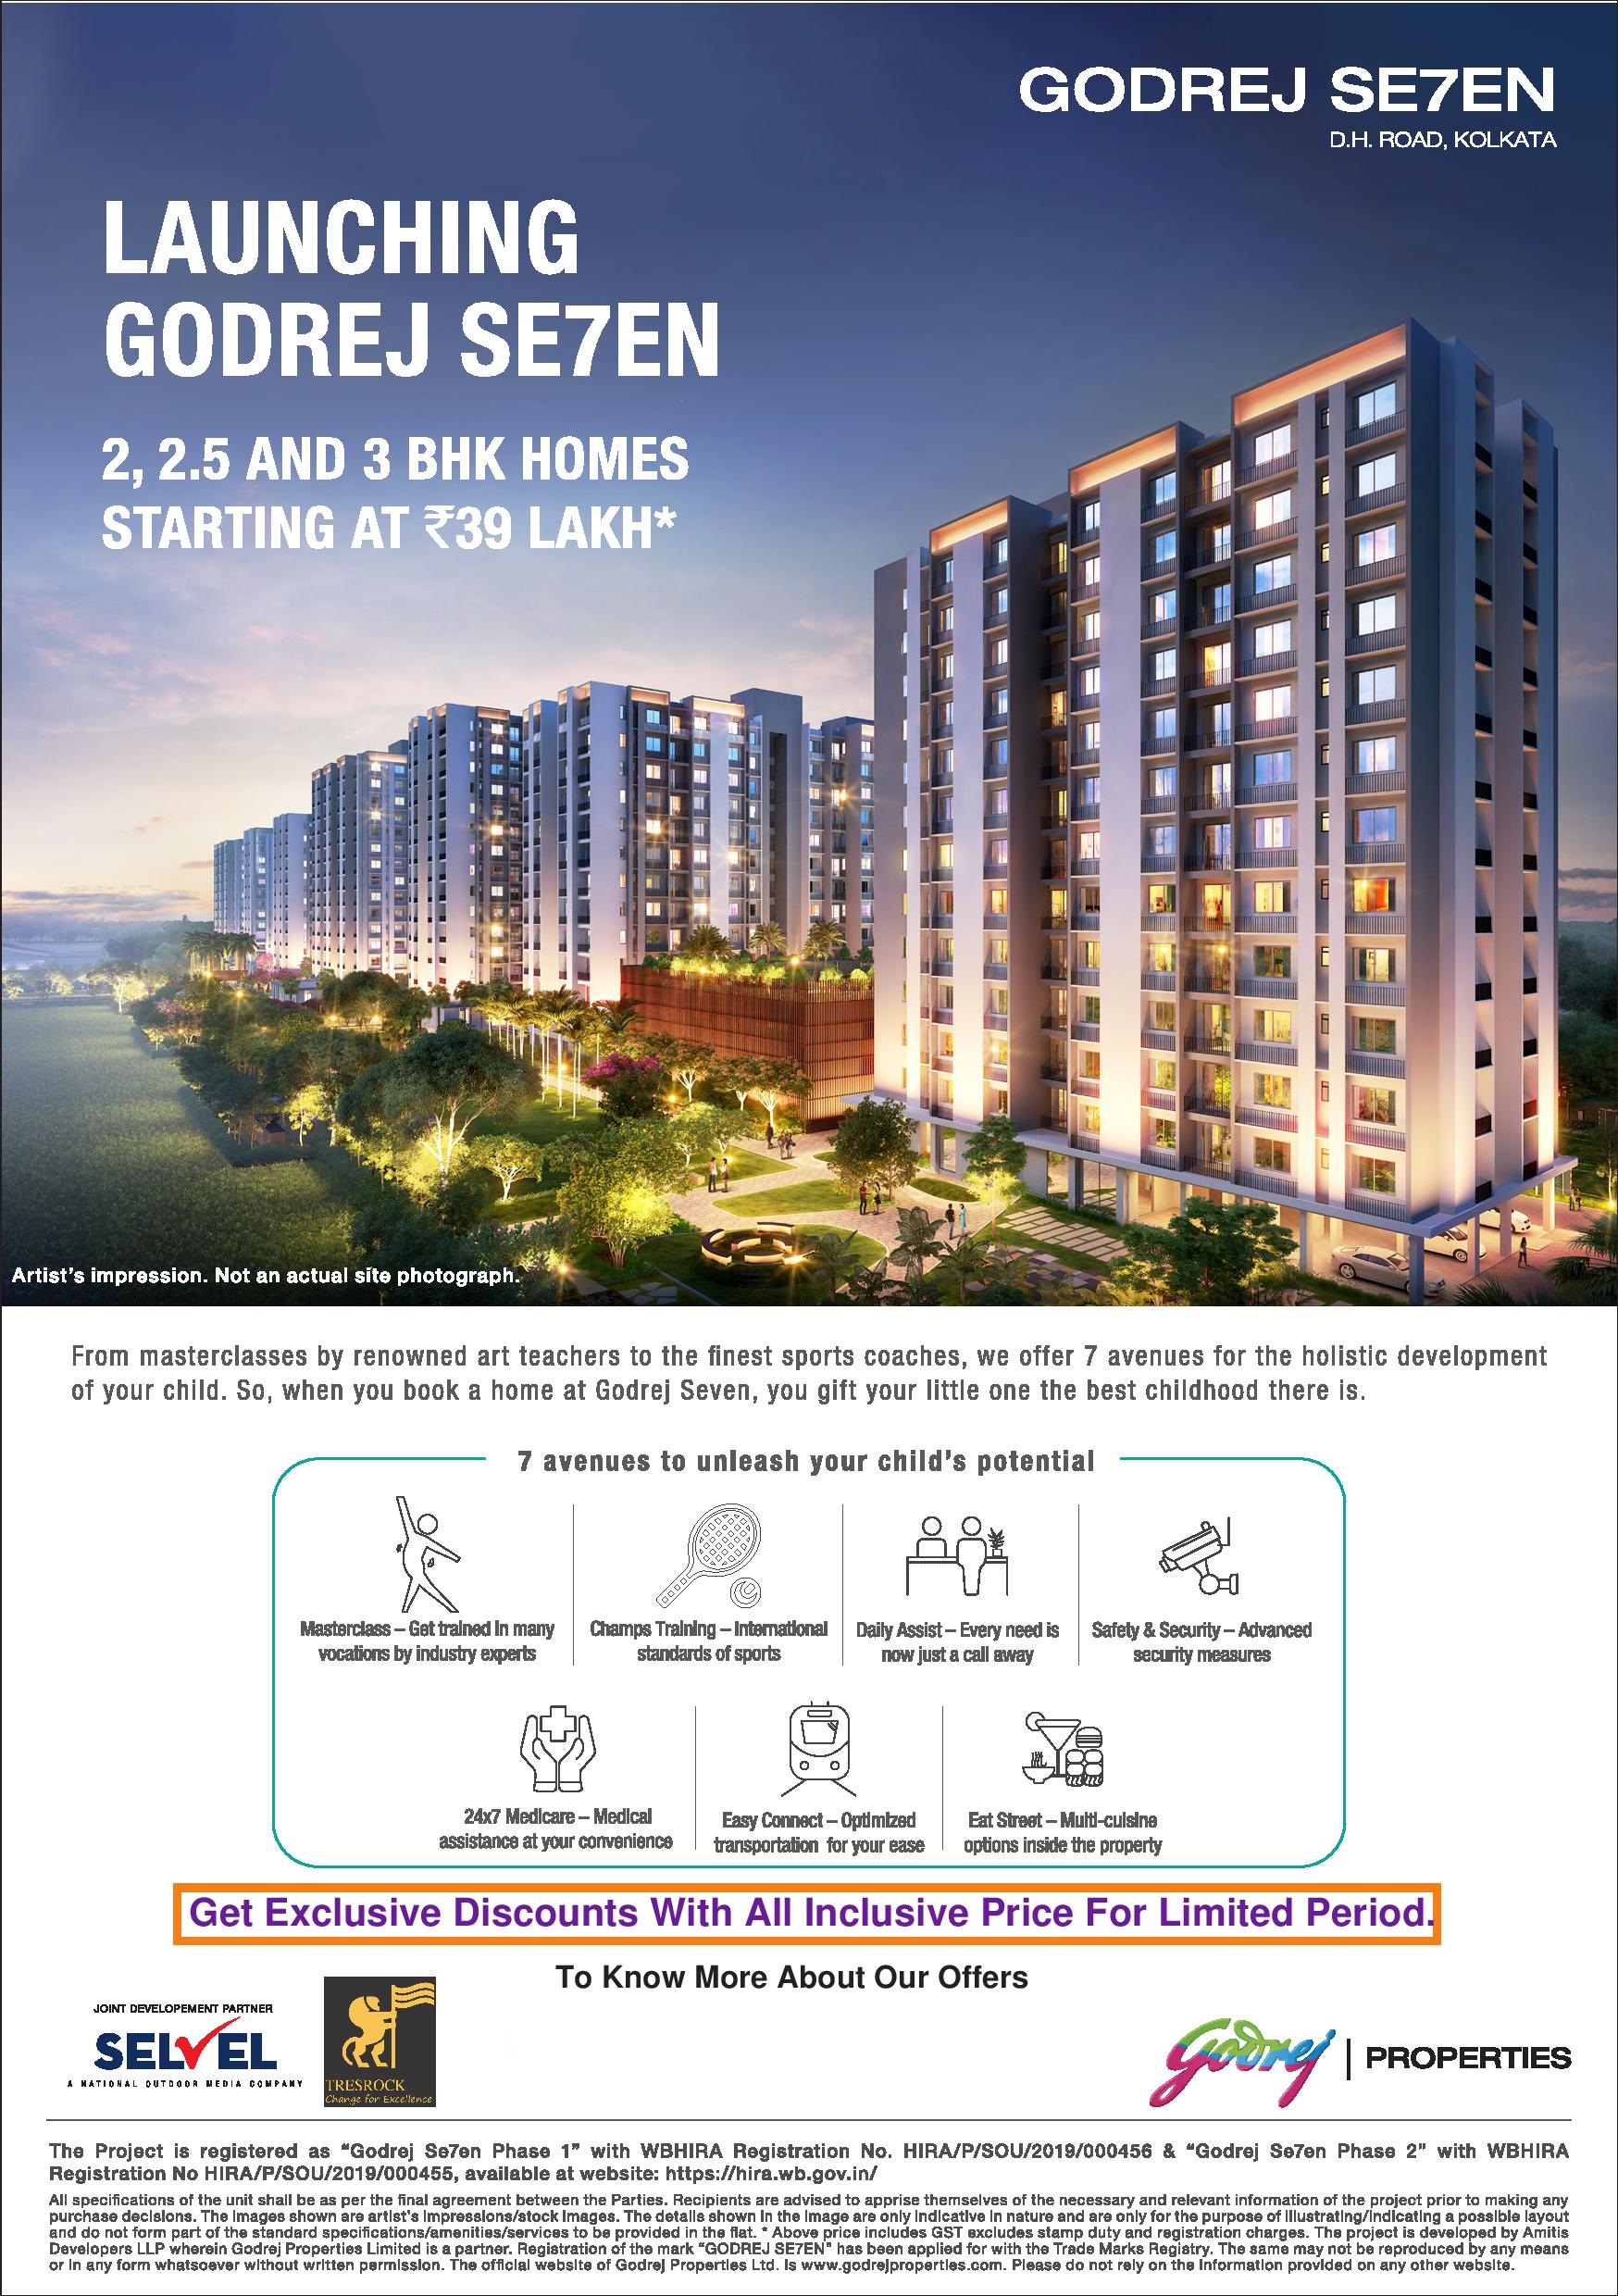 Launching Godrej Seven 2, 2.5 and 3 BHK homes Rs 39 Lac in Kolkata Update